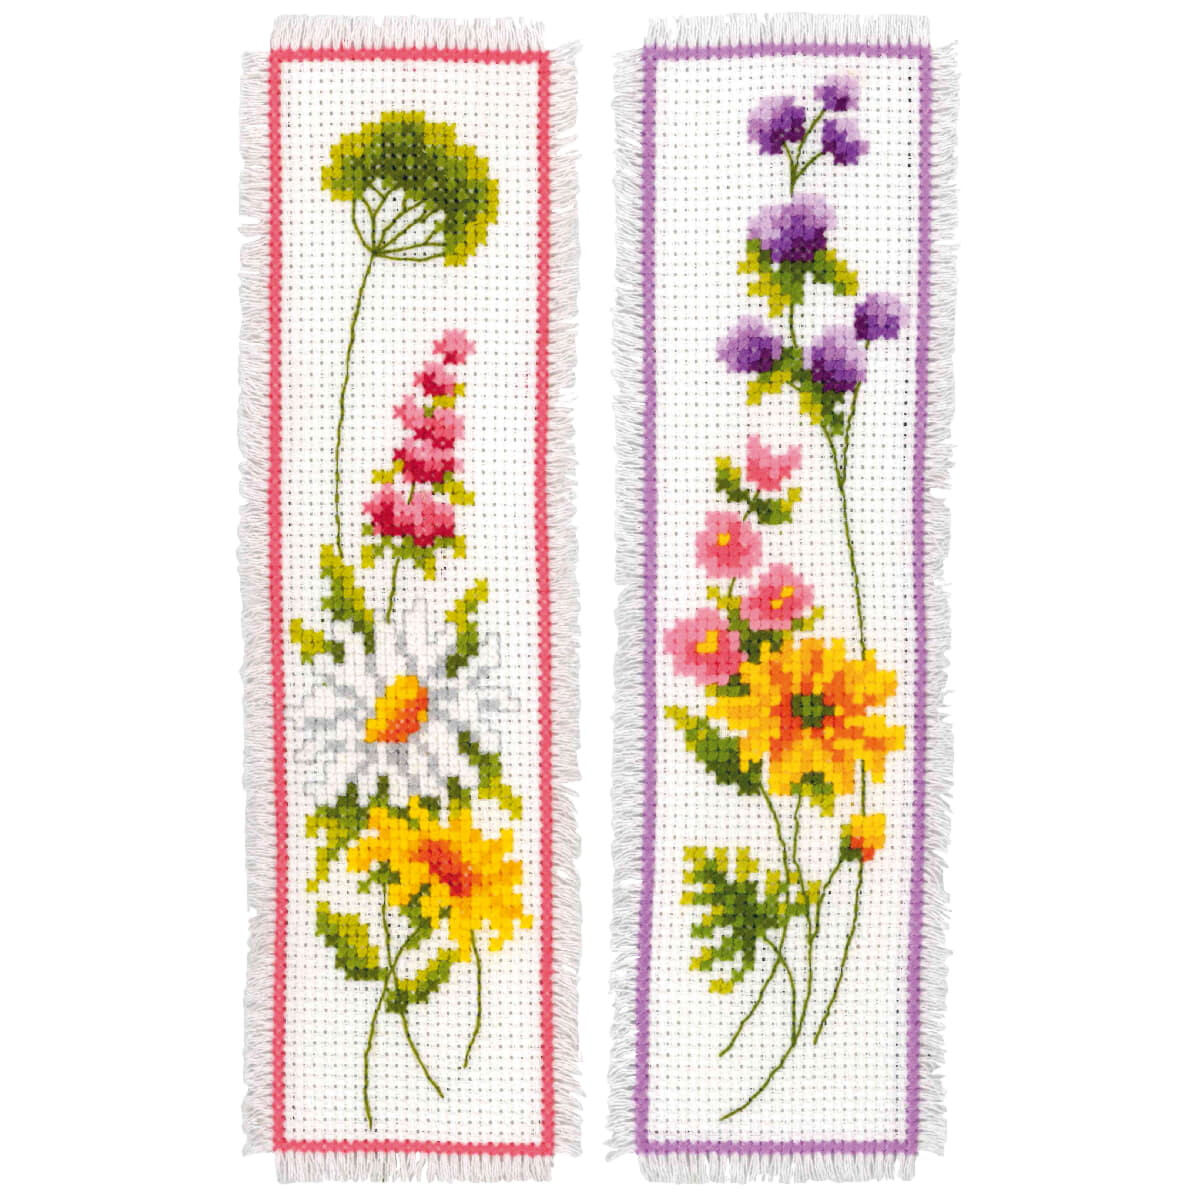 Vervaco bookmark counted cross stitch kit...